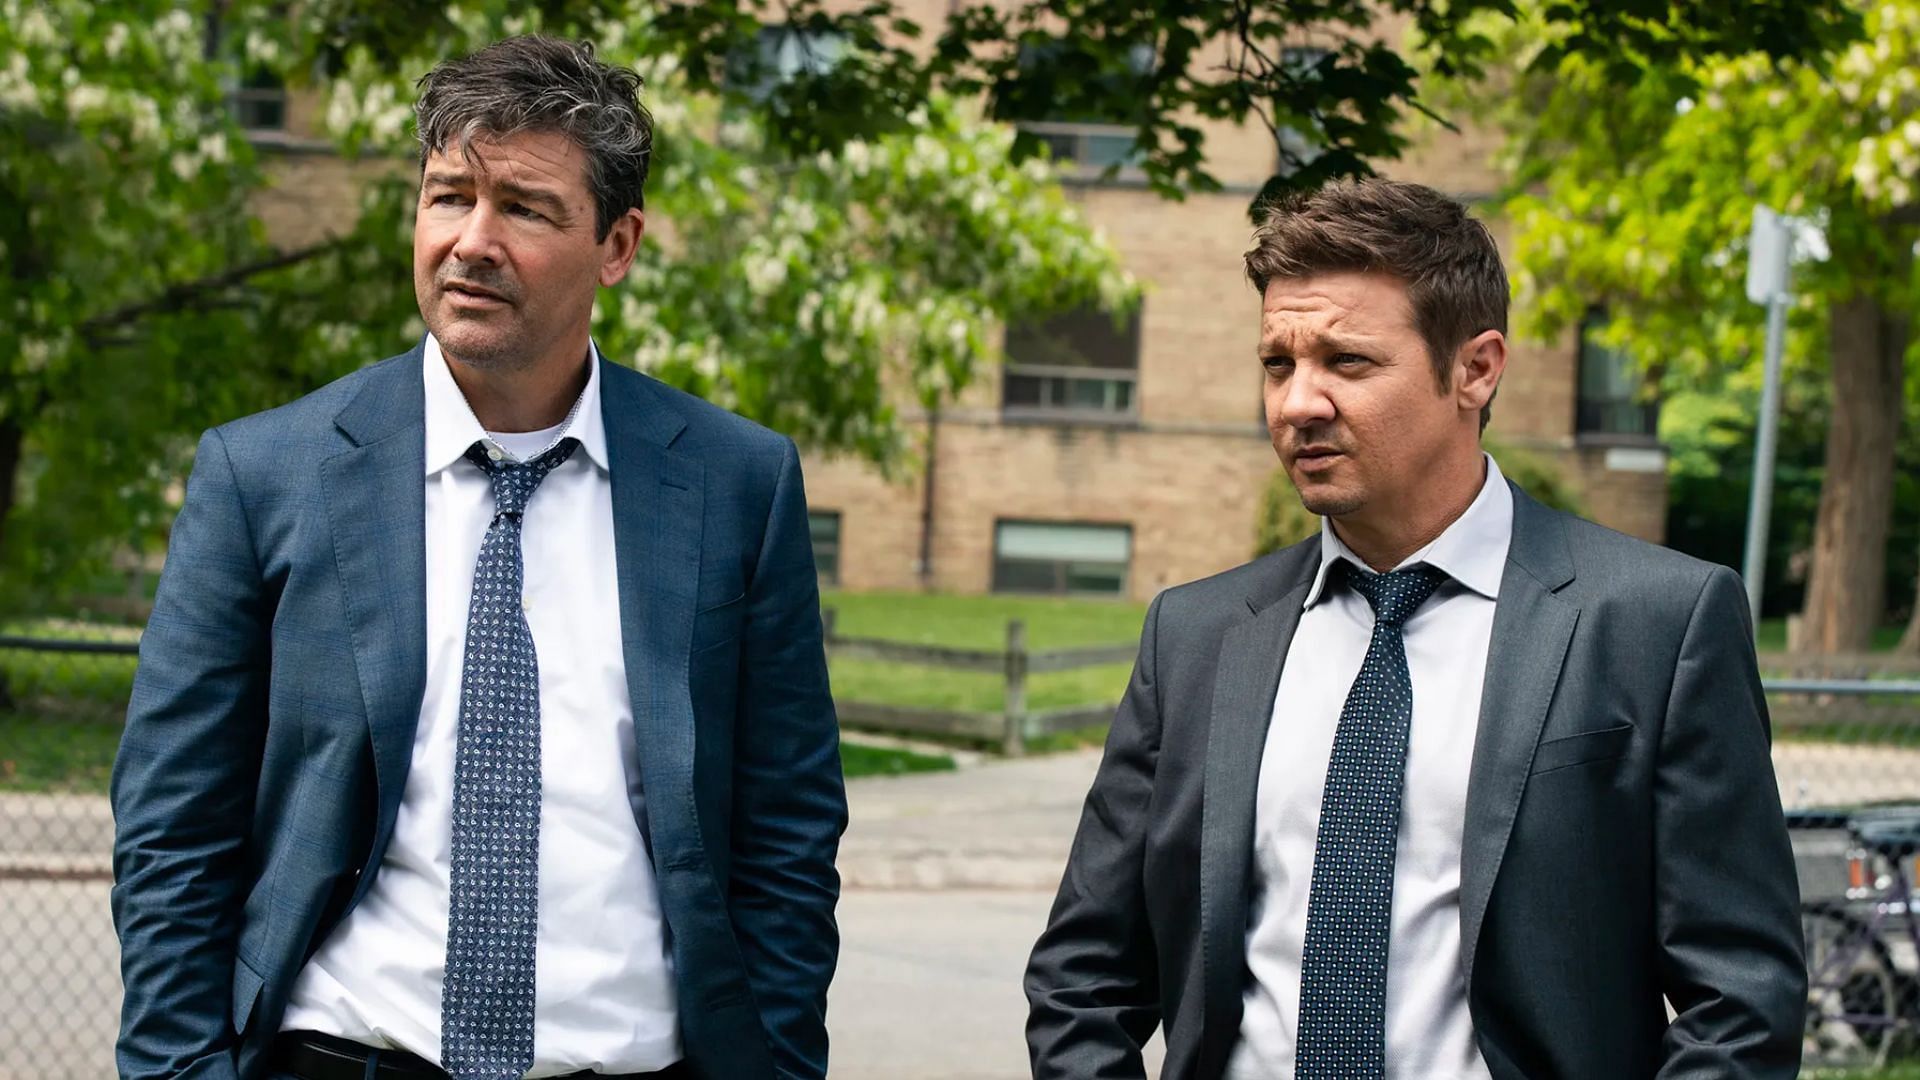 Actors Kyle Chandler and Jeremy Renner on the show (Image via Paramount+)